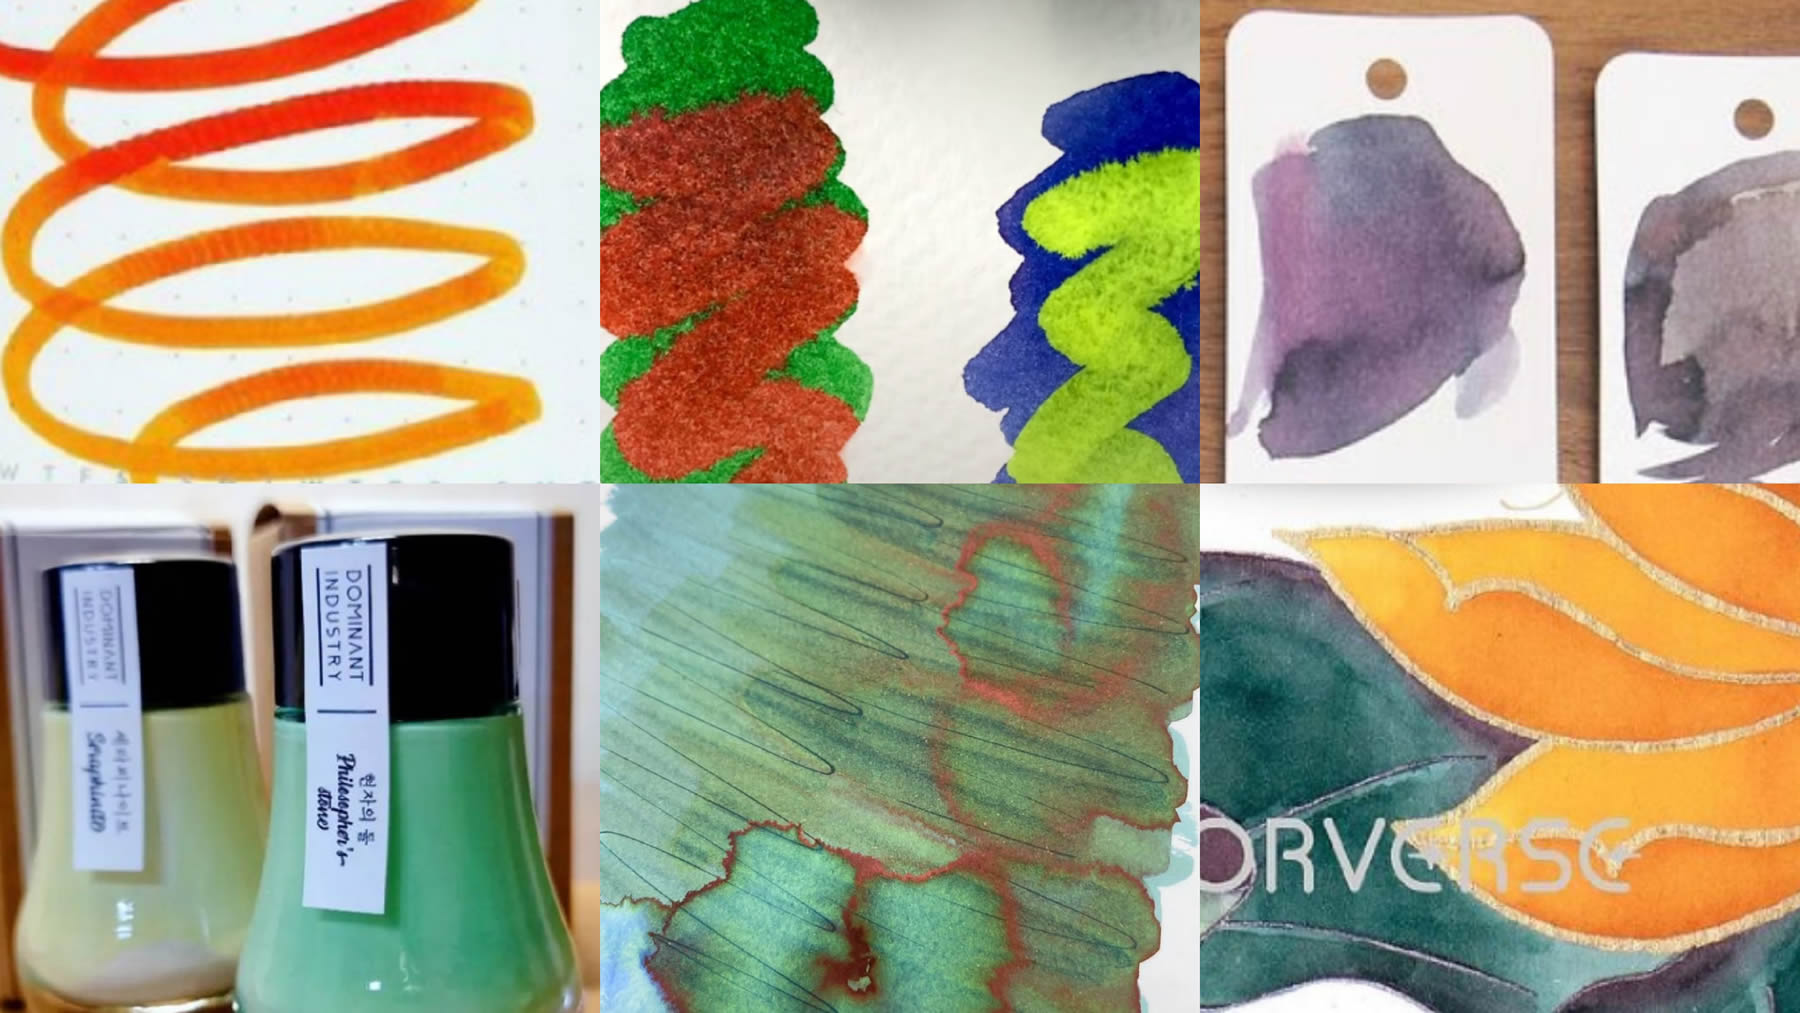 A collage of screenshots showing different ink swatches, ink painting, and bottles.